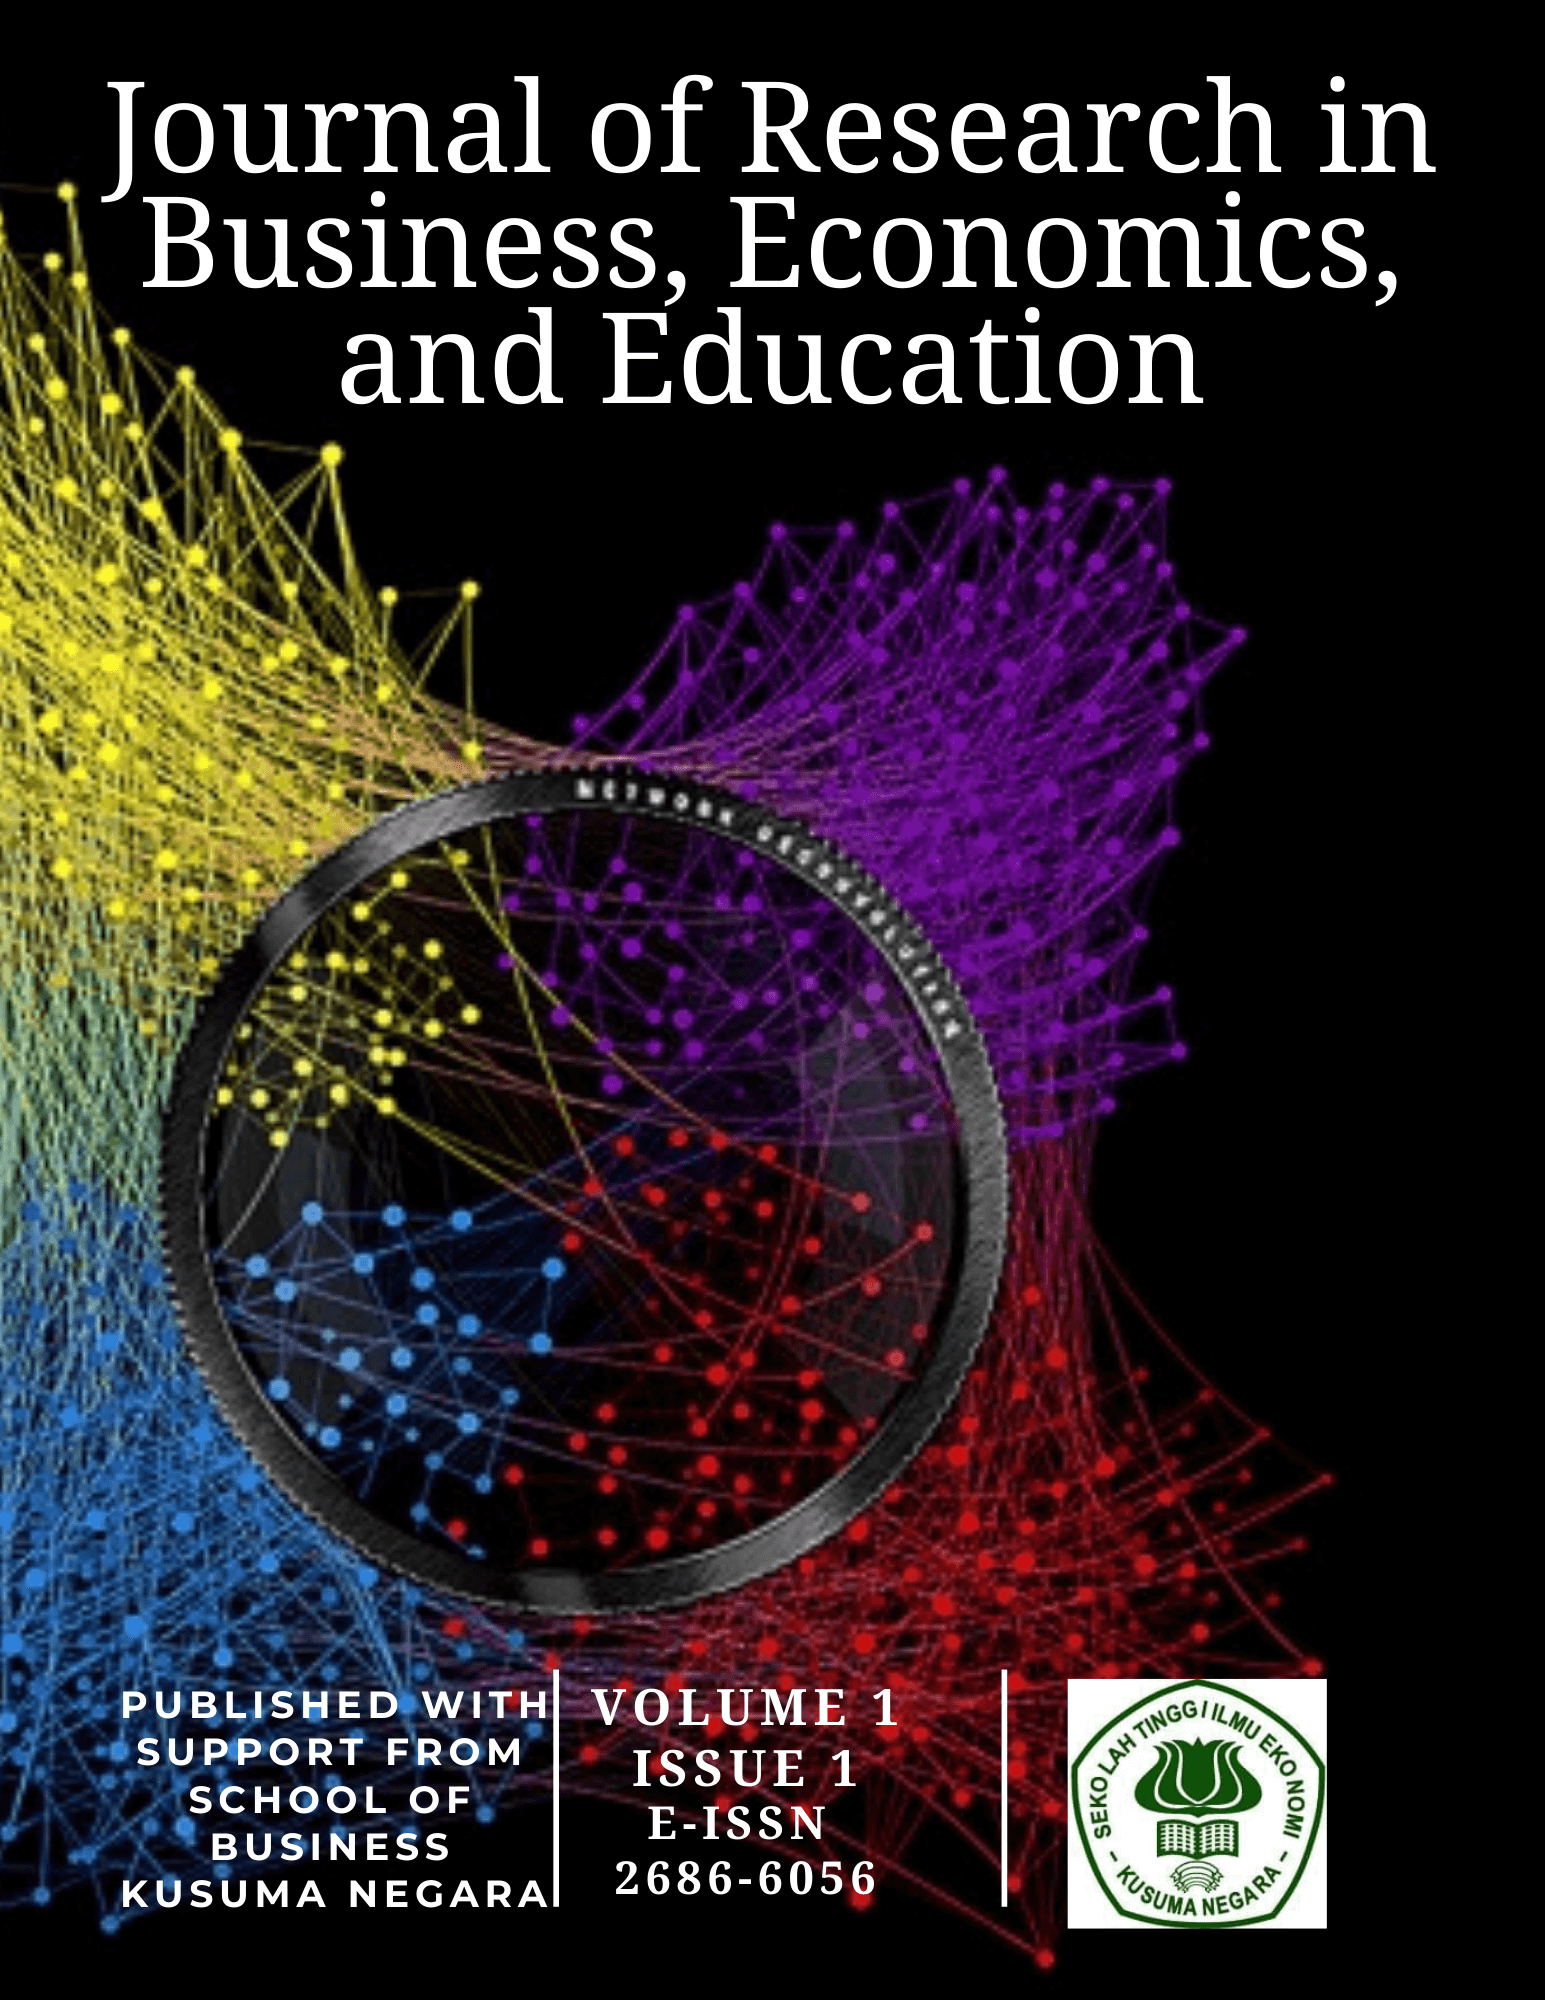 Journal of Research in Business, Economics, and Education